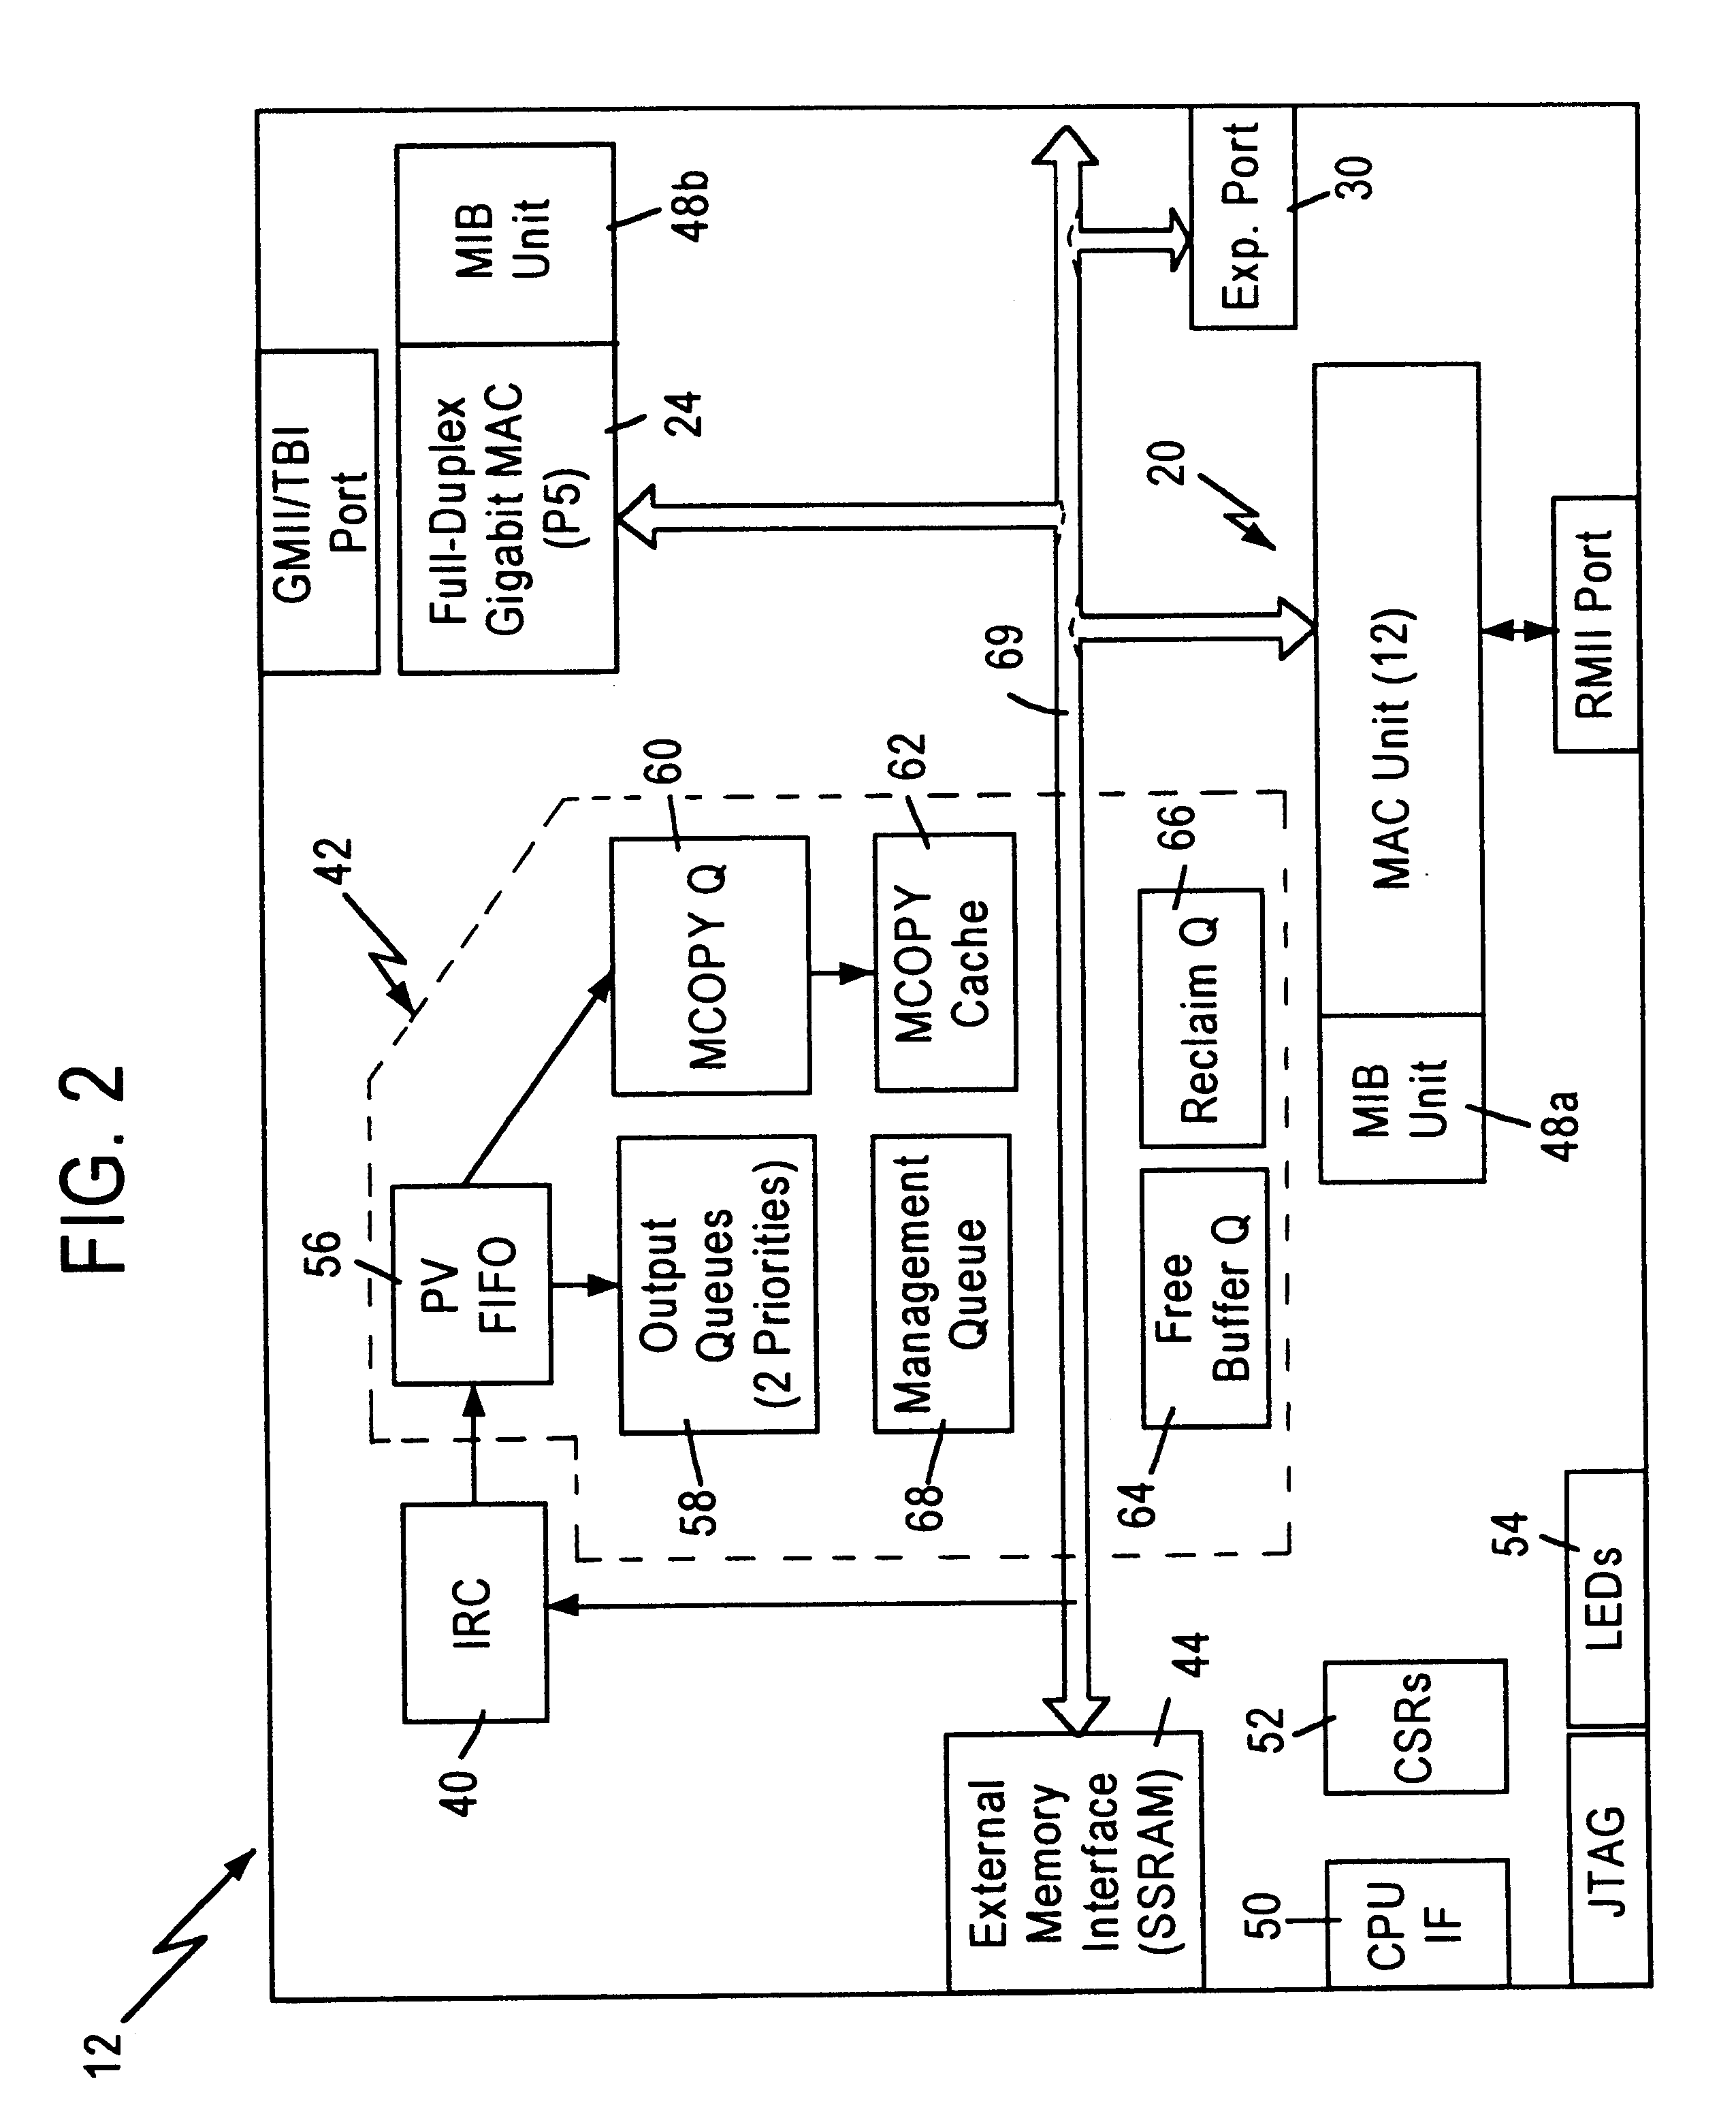 Method and apparatus for manipulating VLAN tags